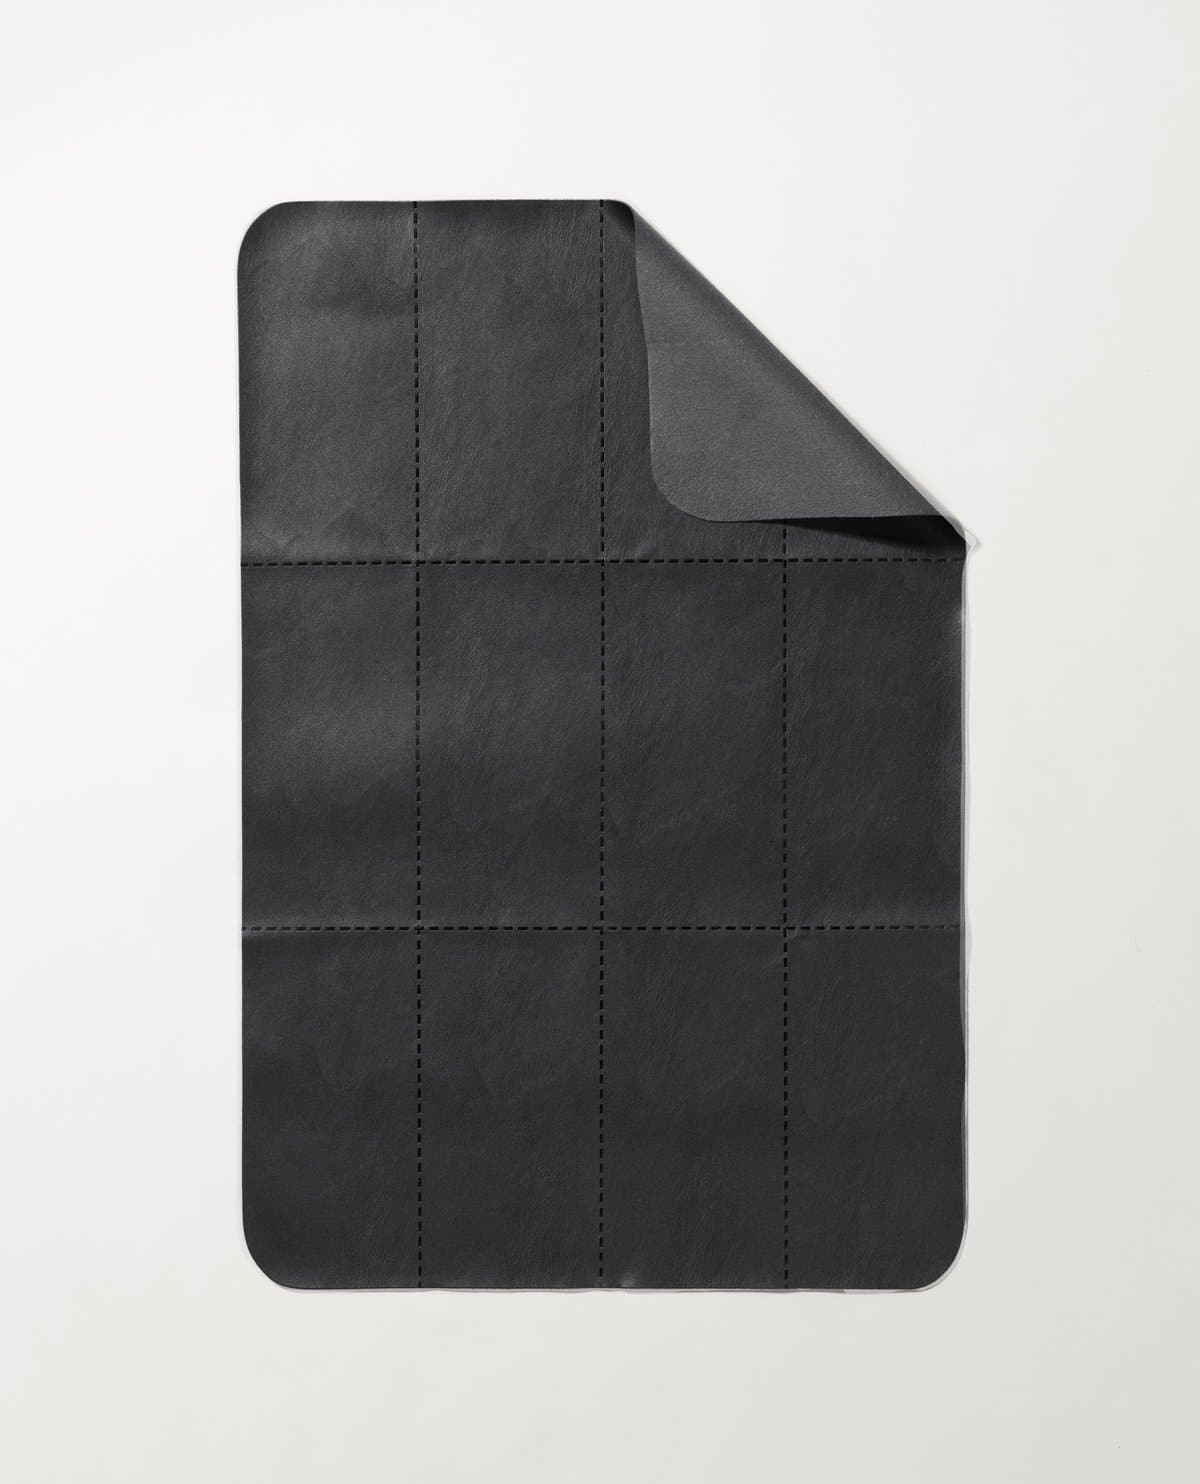 BÉIS 'The Changing Organizer' in Black - Portable Diaper Changing Pad